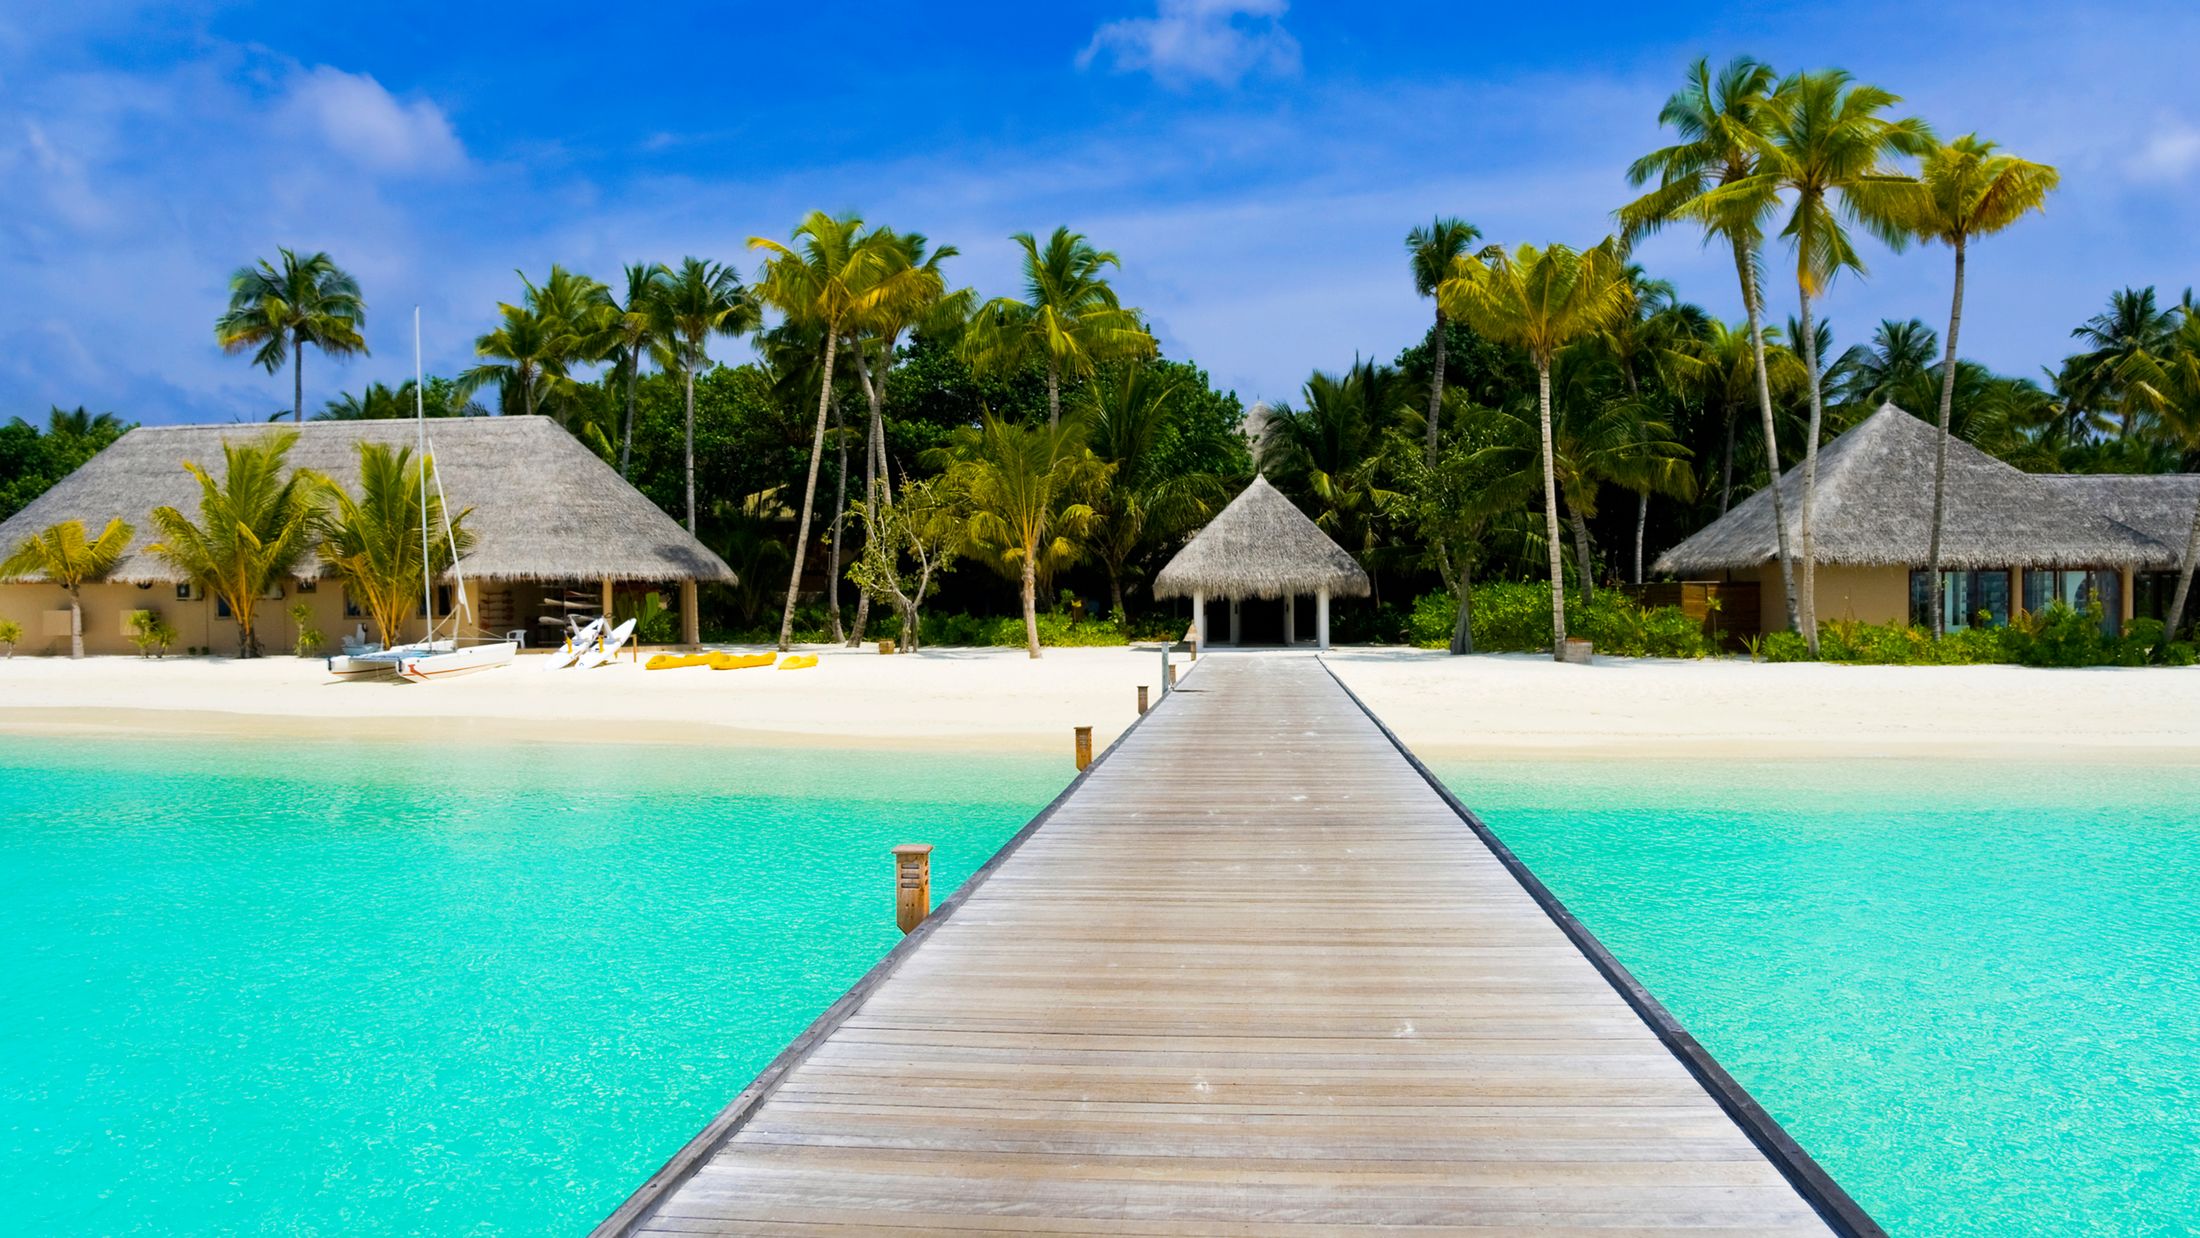 Beach bungalows on a tropical island - travel background